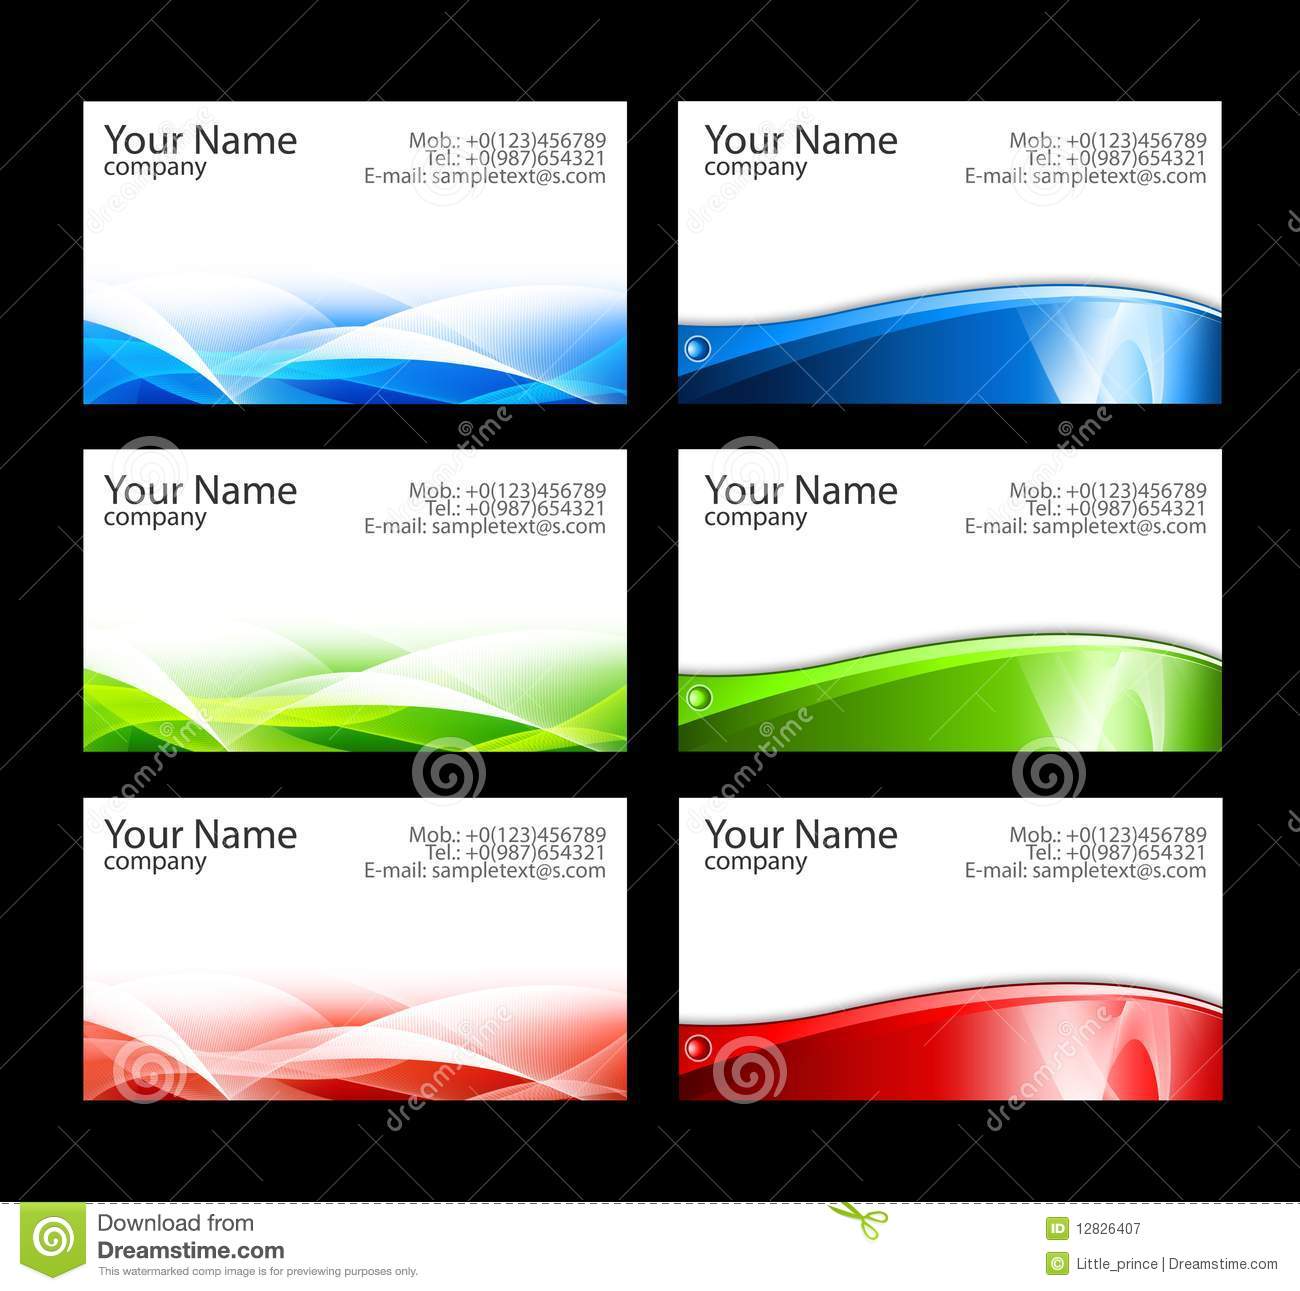 23 Avery Blank Business Card Templates Images - Avery Business Within Word 2013 Business Card Template